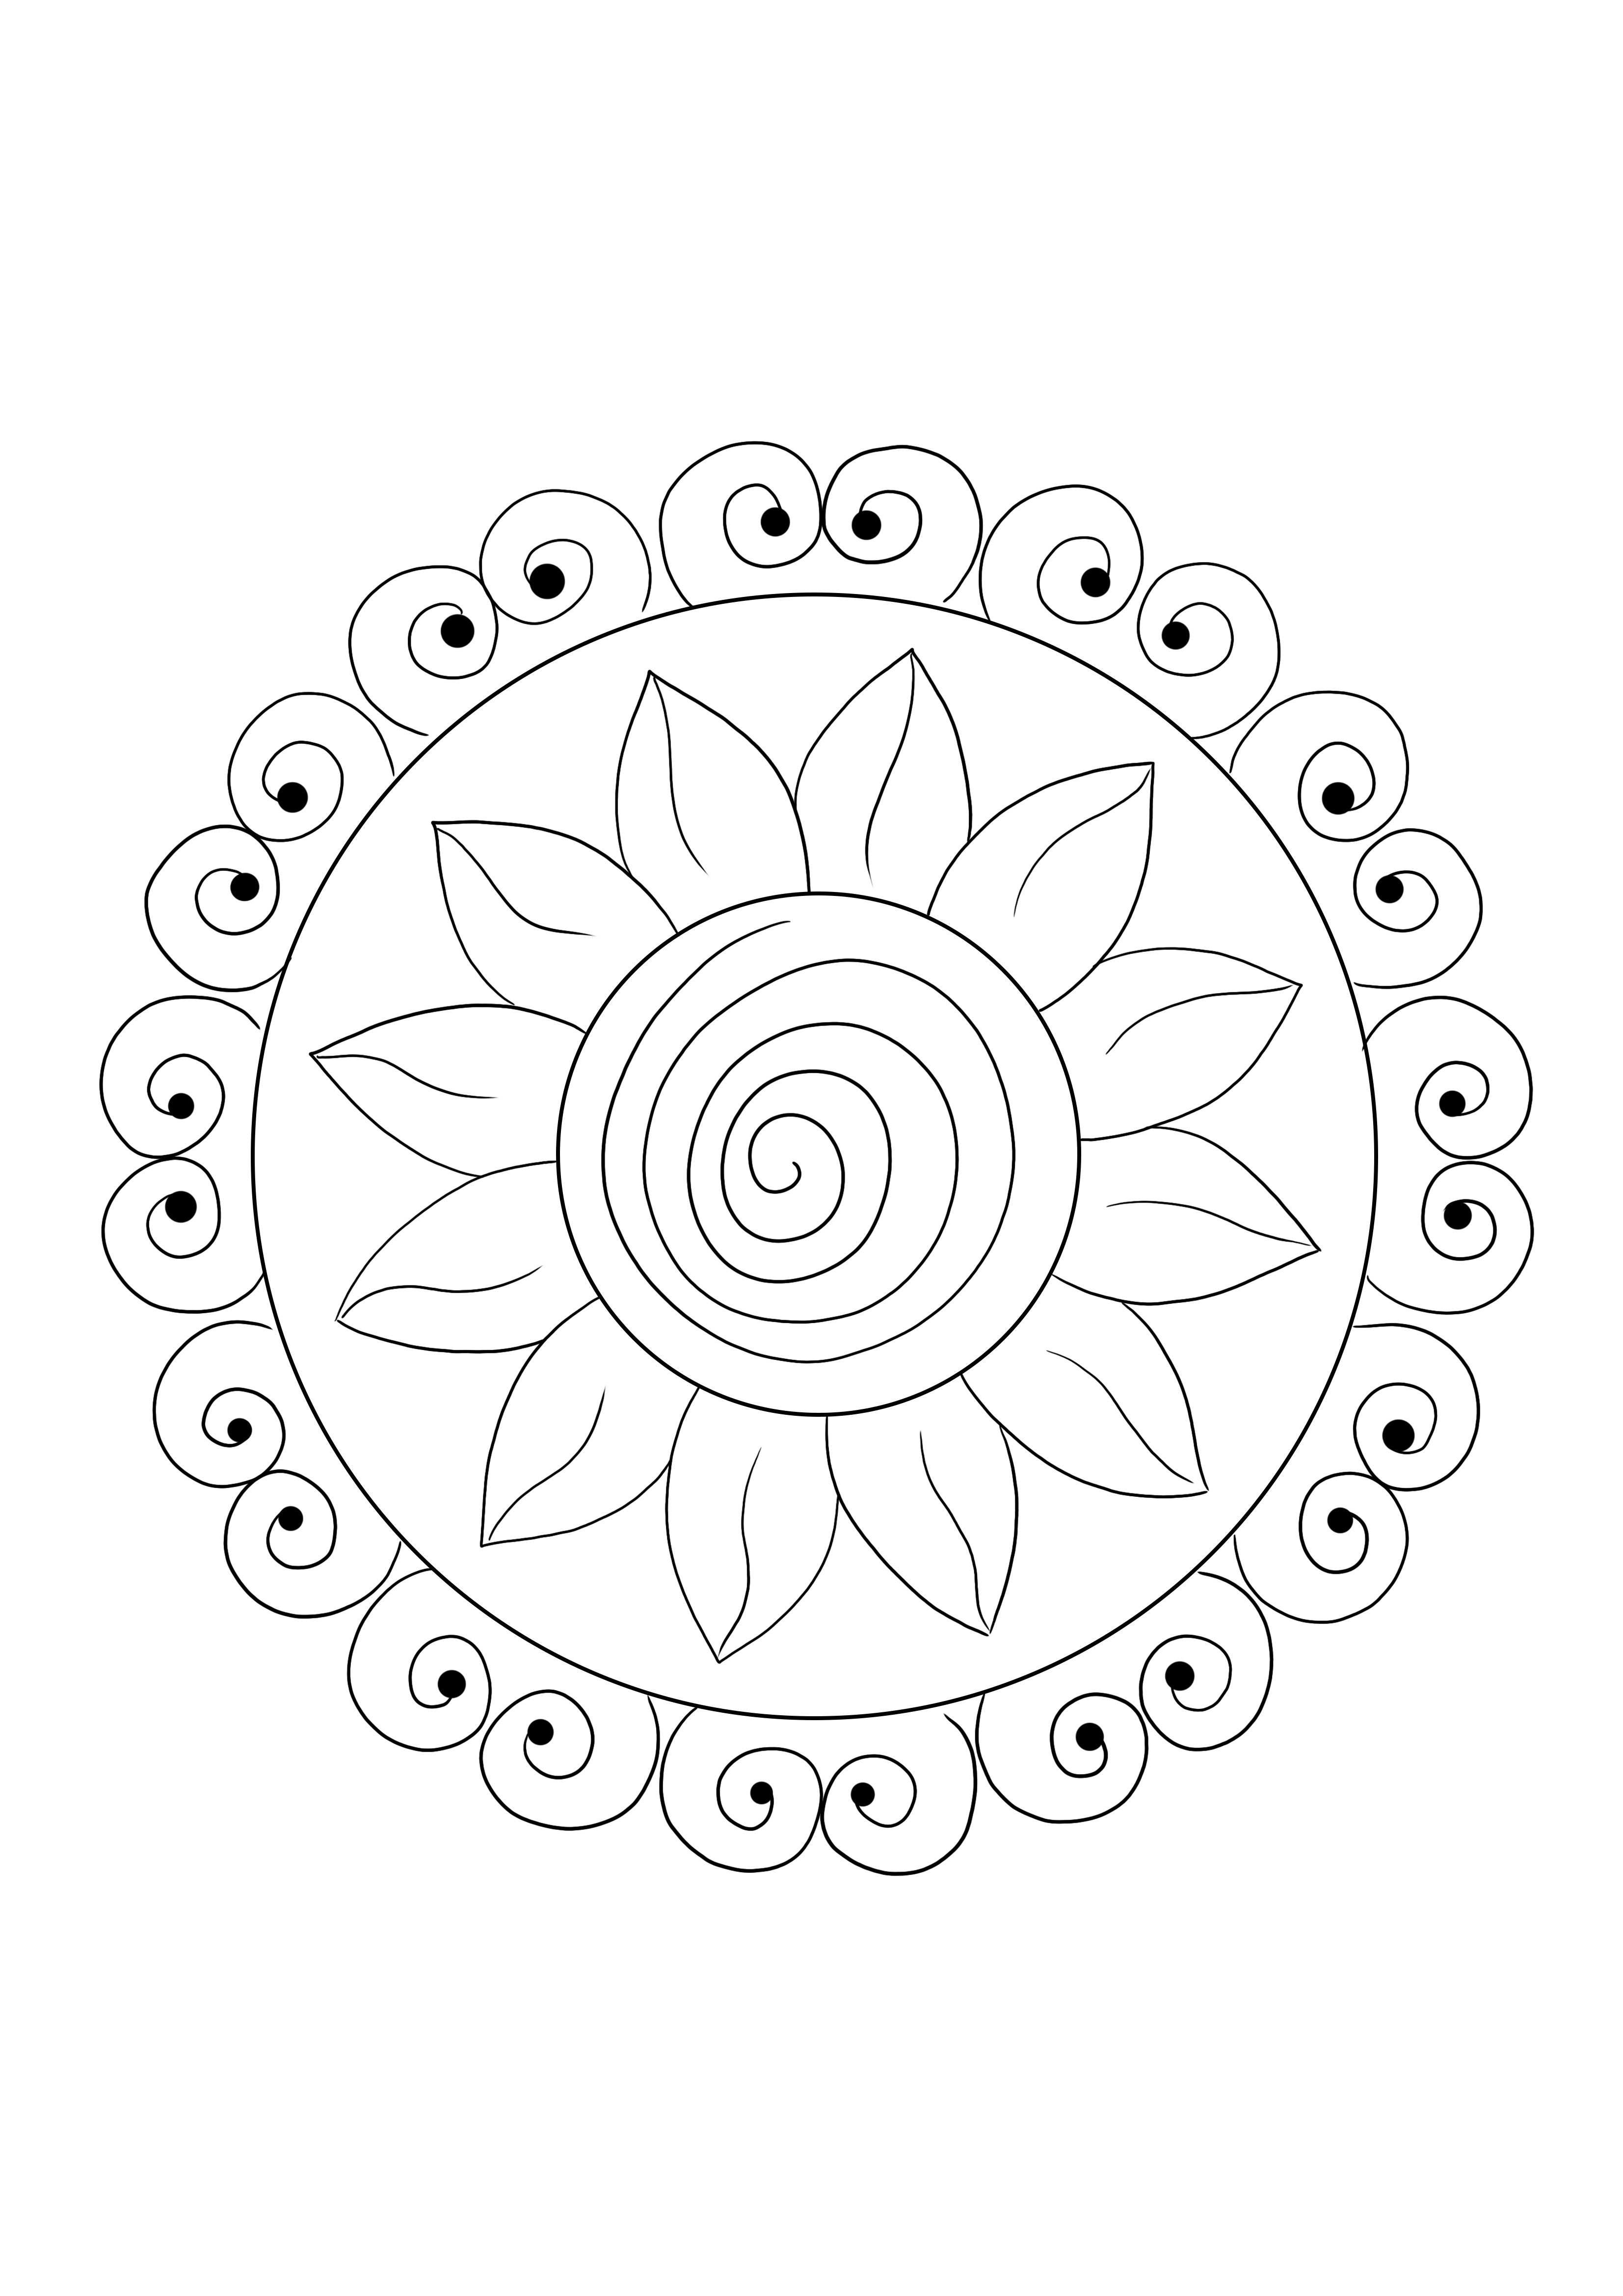 Easy and free coloring of Diwali Rangoli to learn about arts and culture